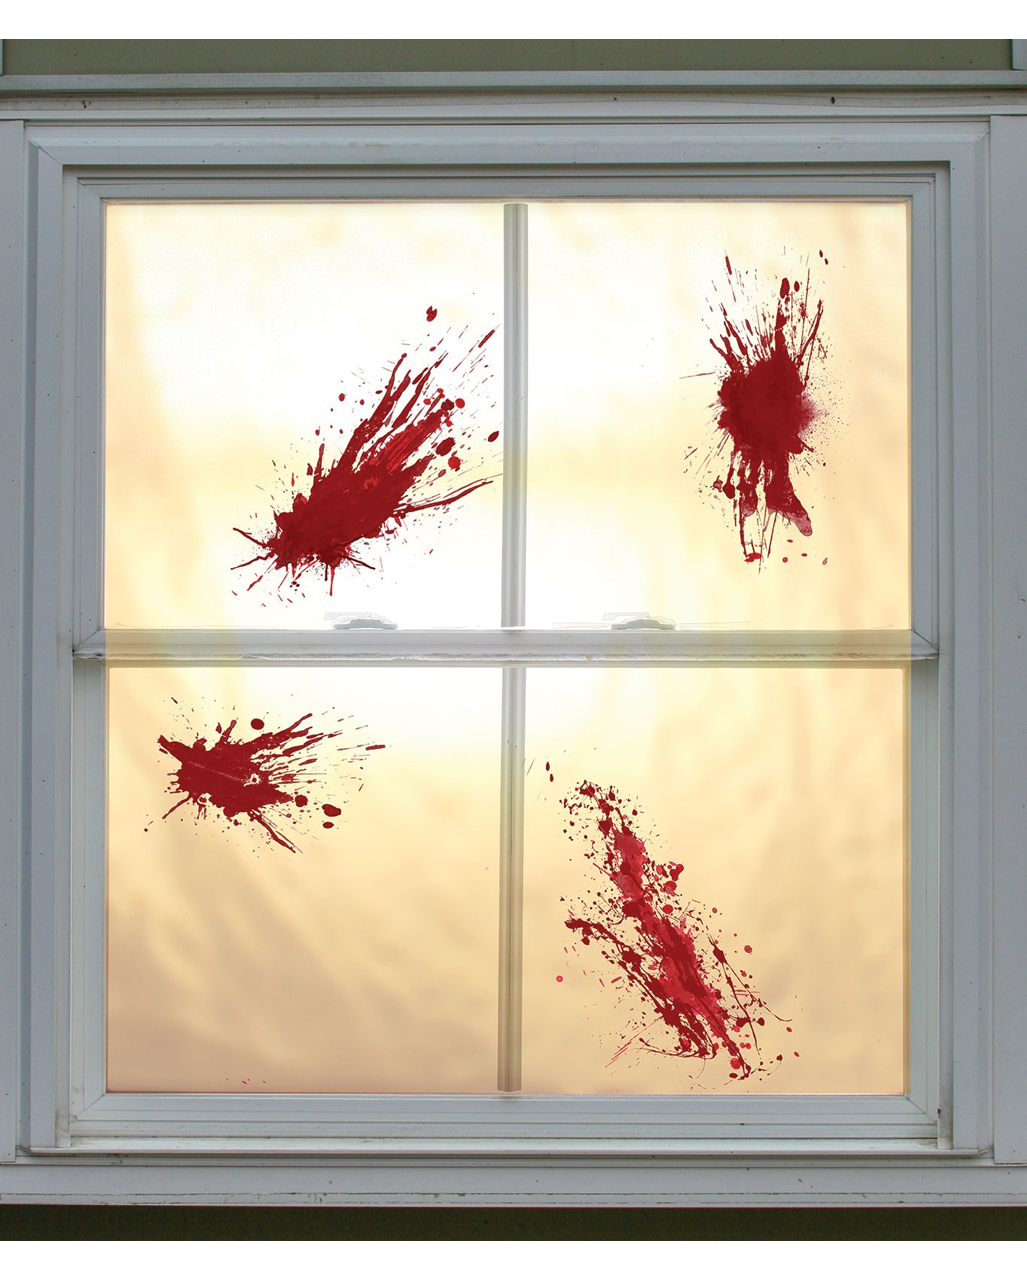 Details about   Blood Hands Window Decoration Horrible Blooded Fancy Dress Costume Halloween 